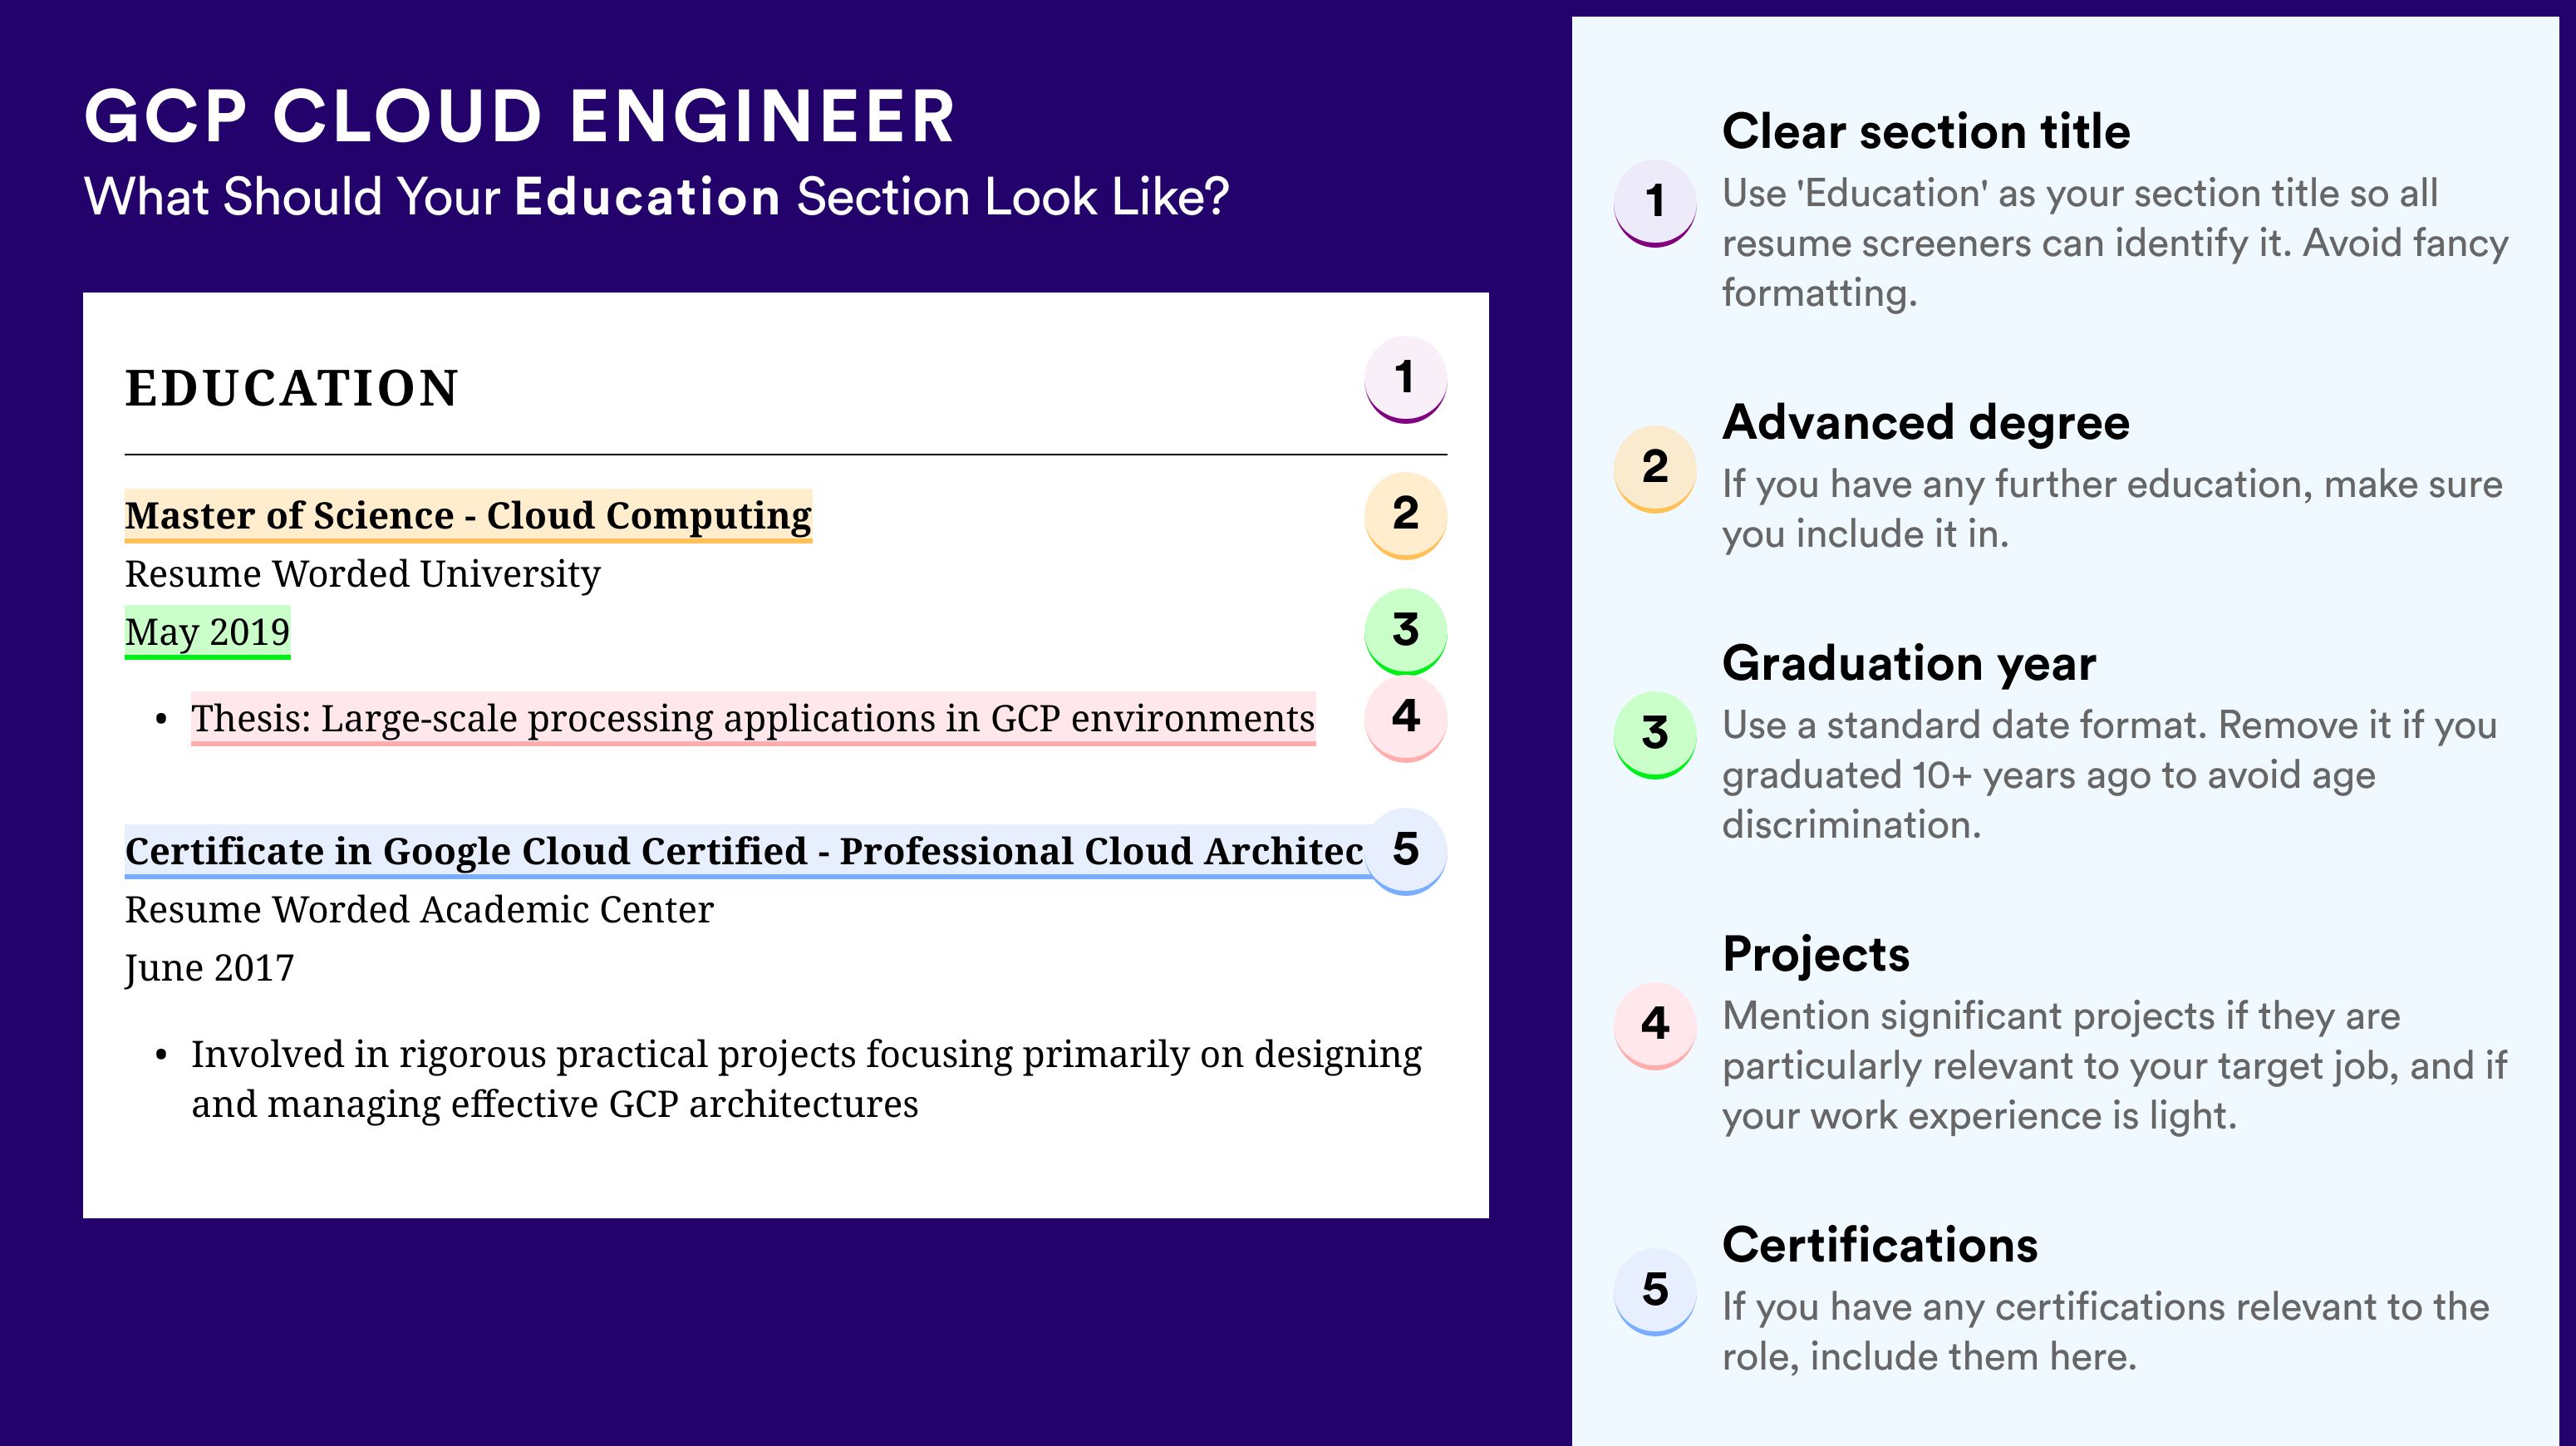 How To Write An Education Section - GCP Cloud Engineer Roles